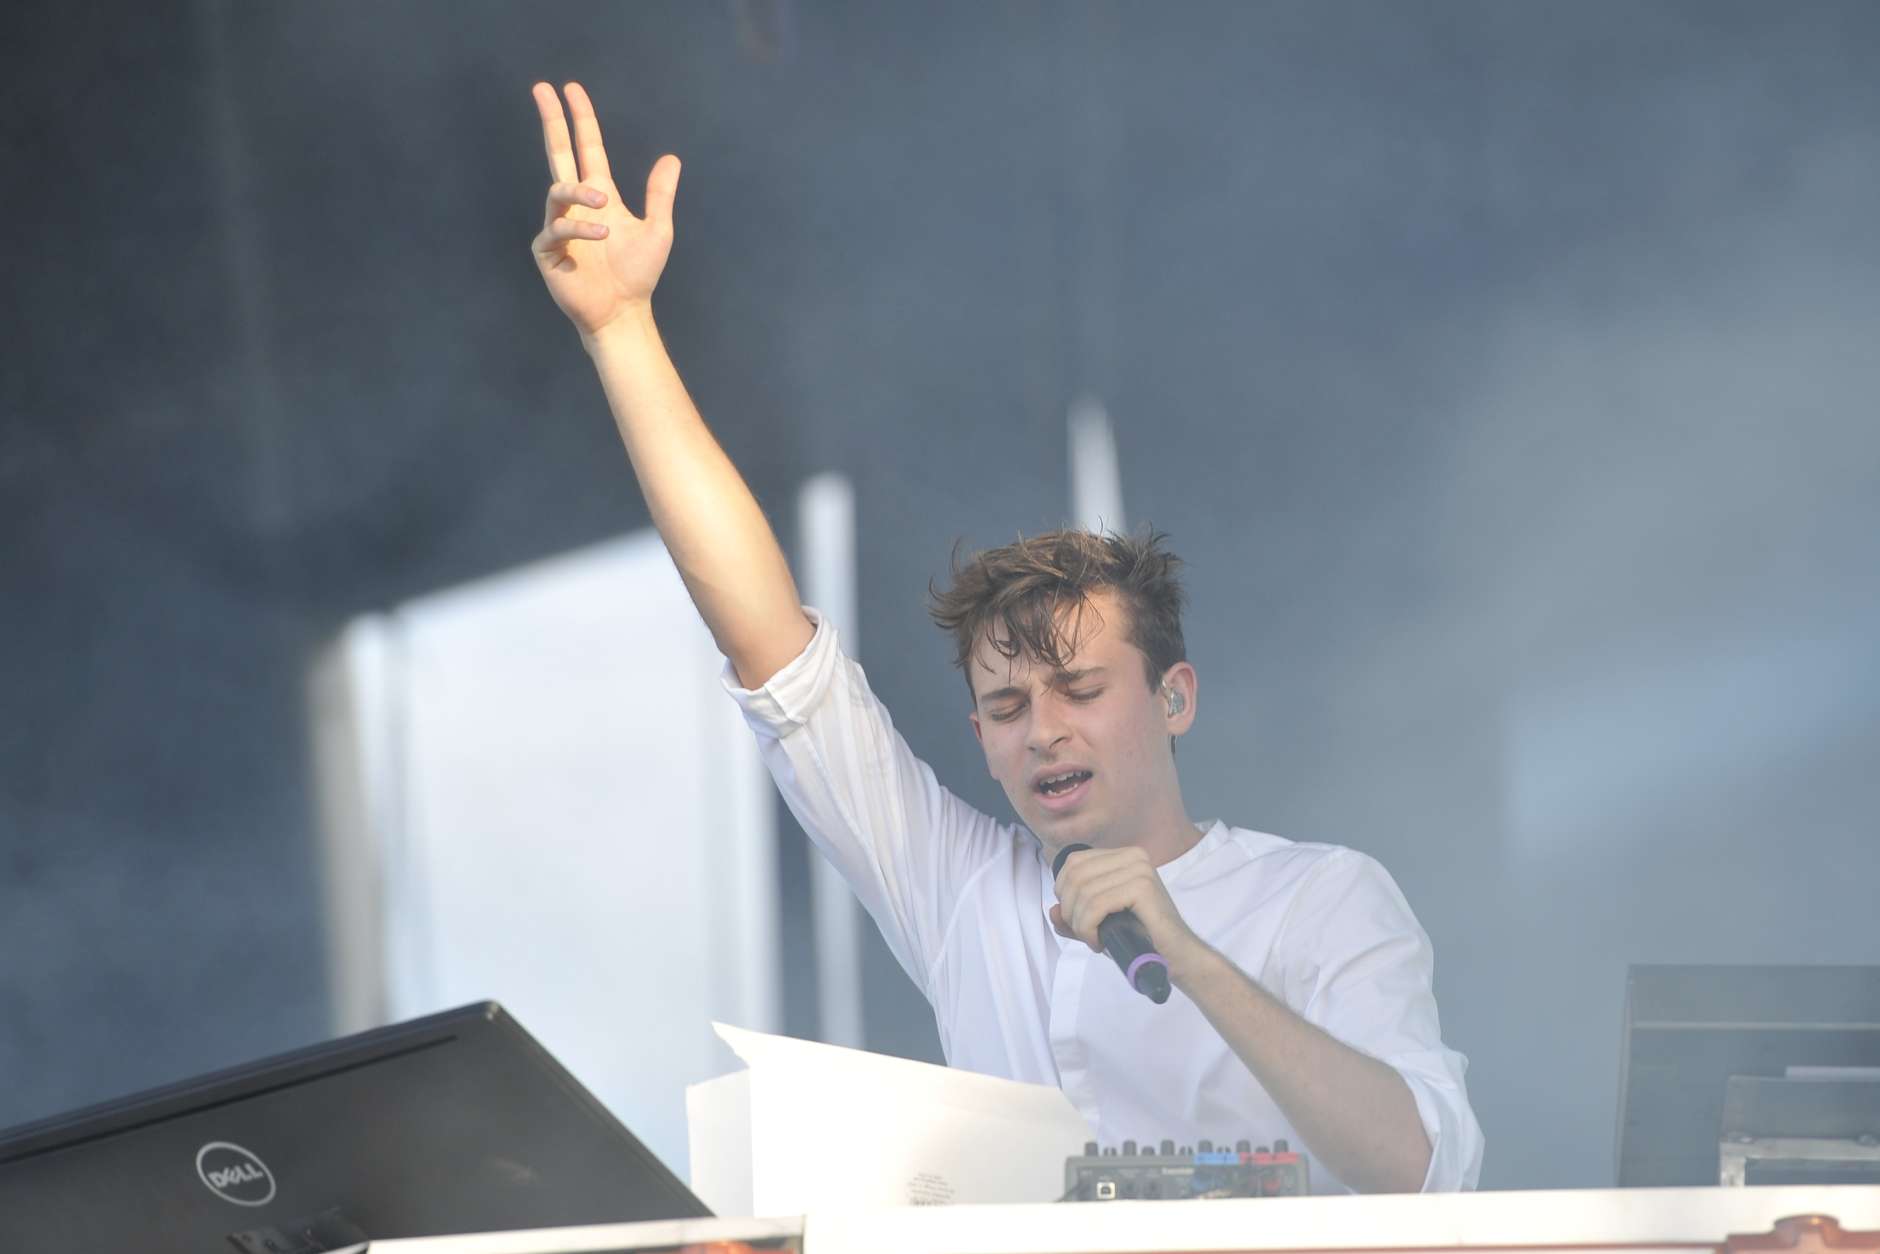 Flume performs on day 4 at Lollapalooza in Grant Park on Saturday, July 31, 2016, in Chicago. (Photo by Rob Grabowski/Invision/AP)